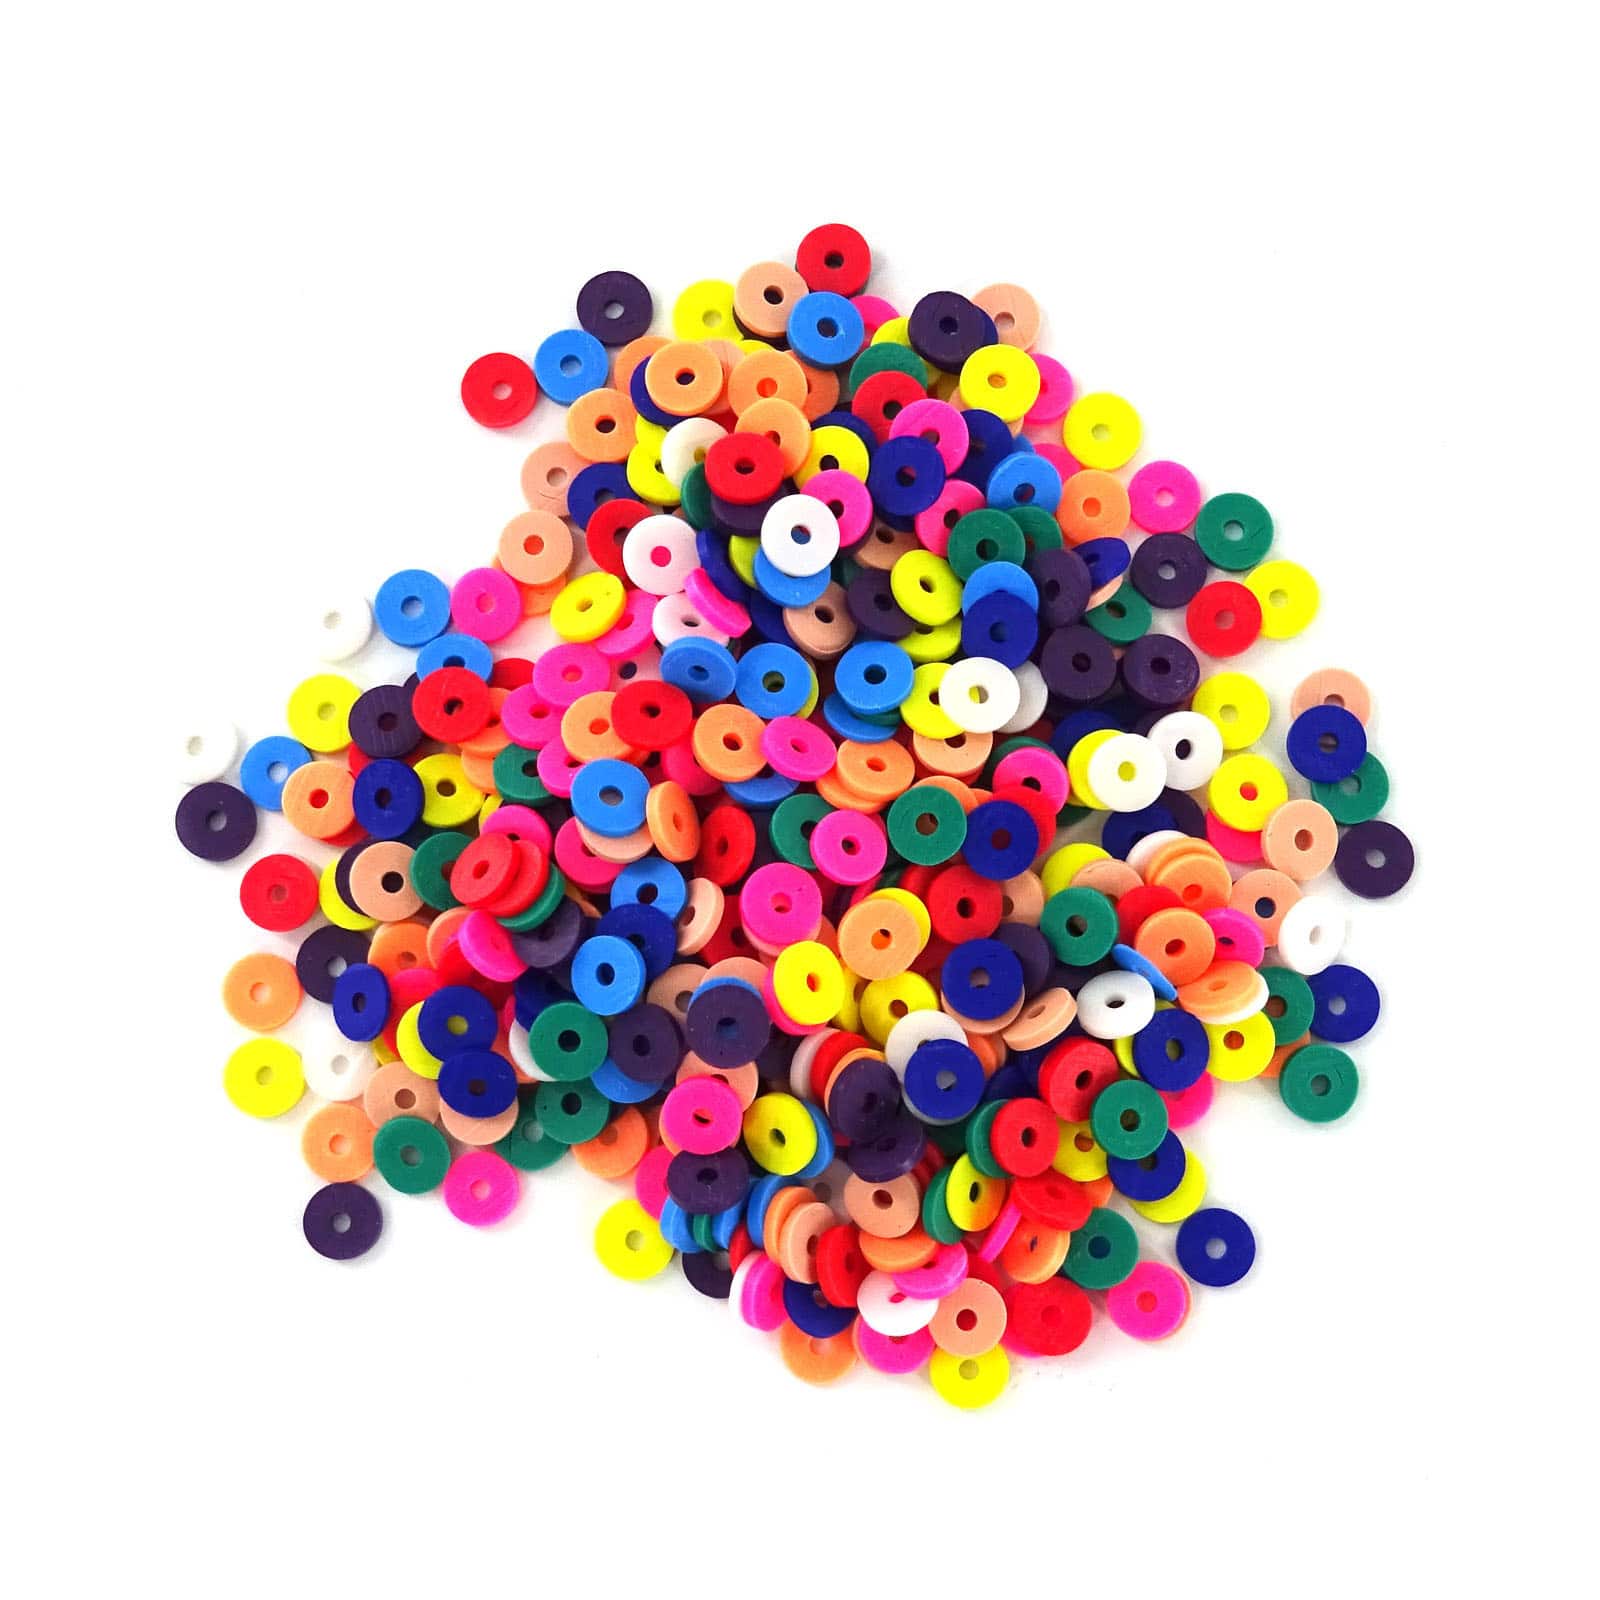 12 Packs: 500 ct. (6,000 total) Multicolored Clay Beads by Creatology™